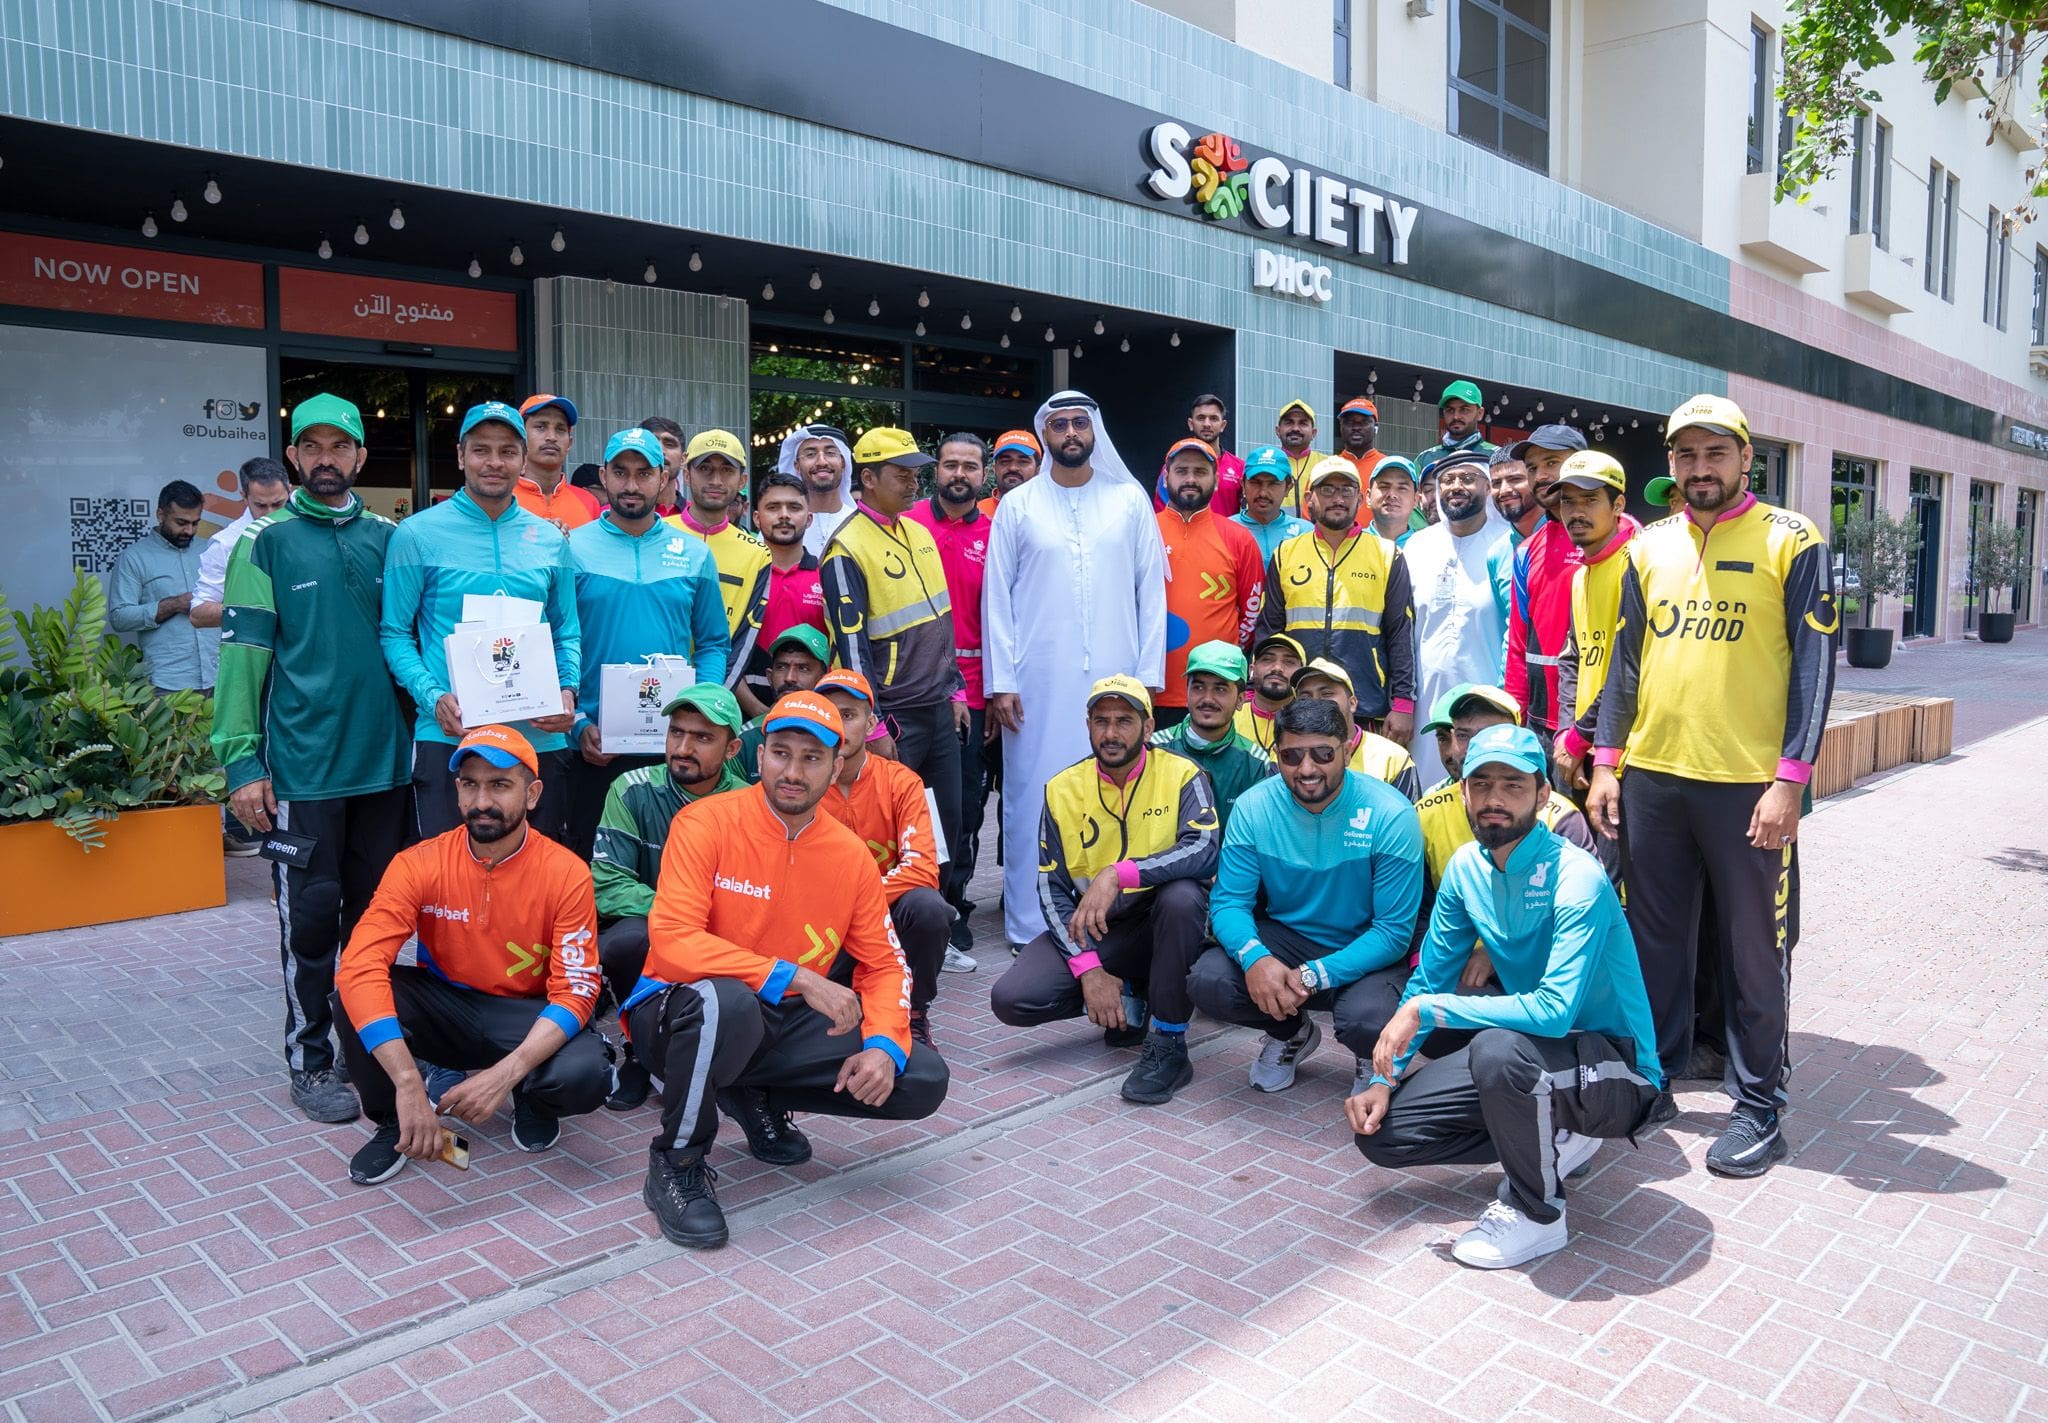 DUBAI HEALTHCARE CITY ‘RIDERS’ CORNER’ INTRODUCES FREE HEALTH SCREENINGS FOR DELIVERY RIDERS IN THE CITY